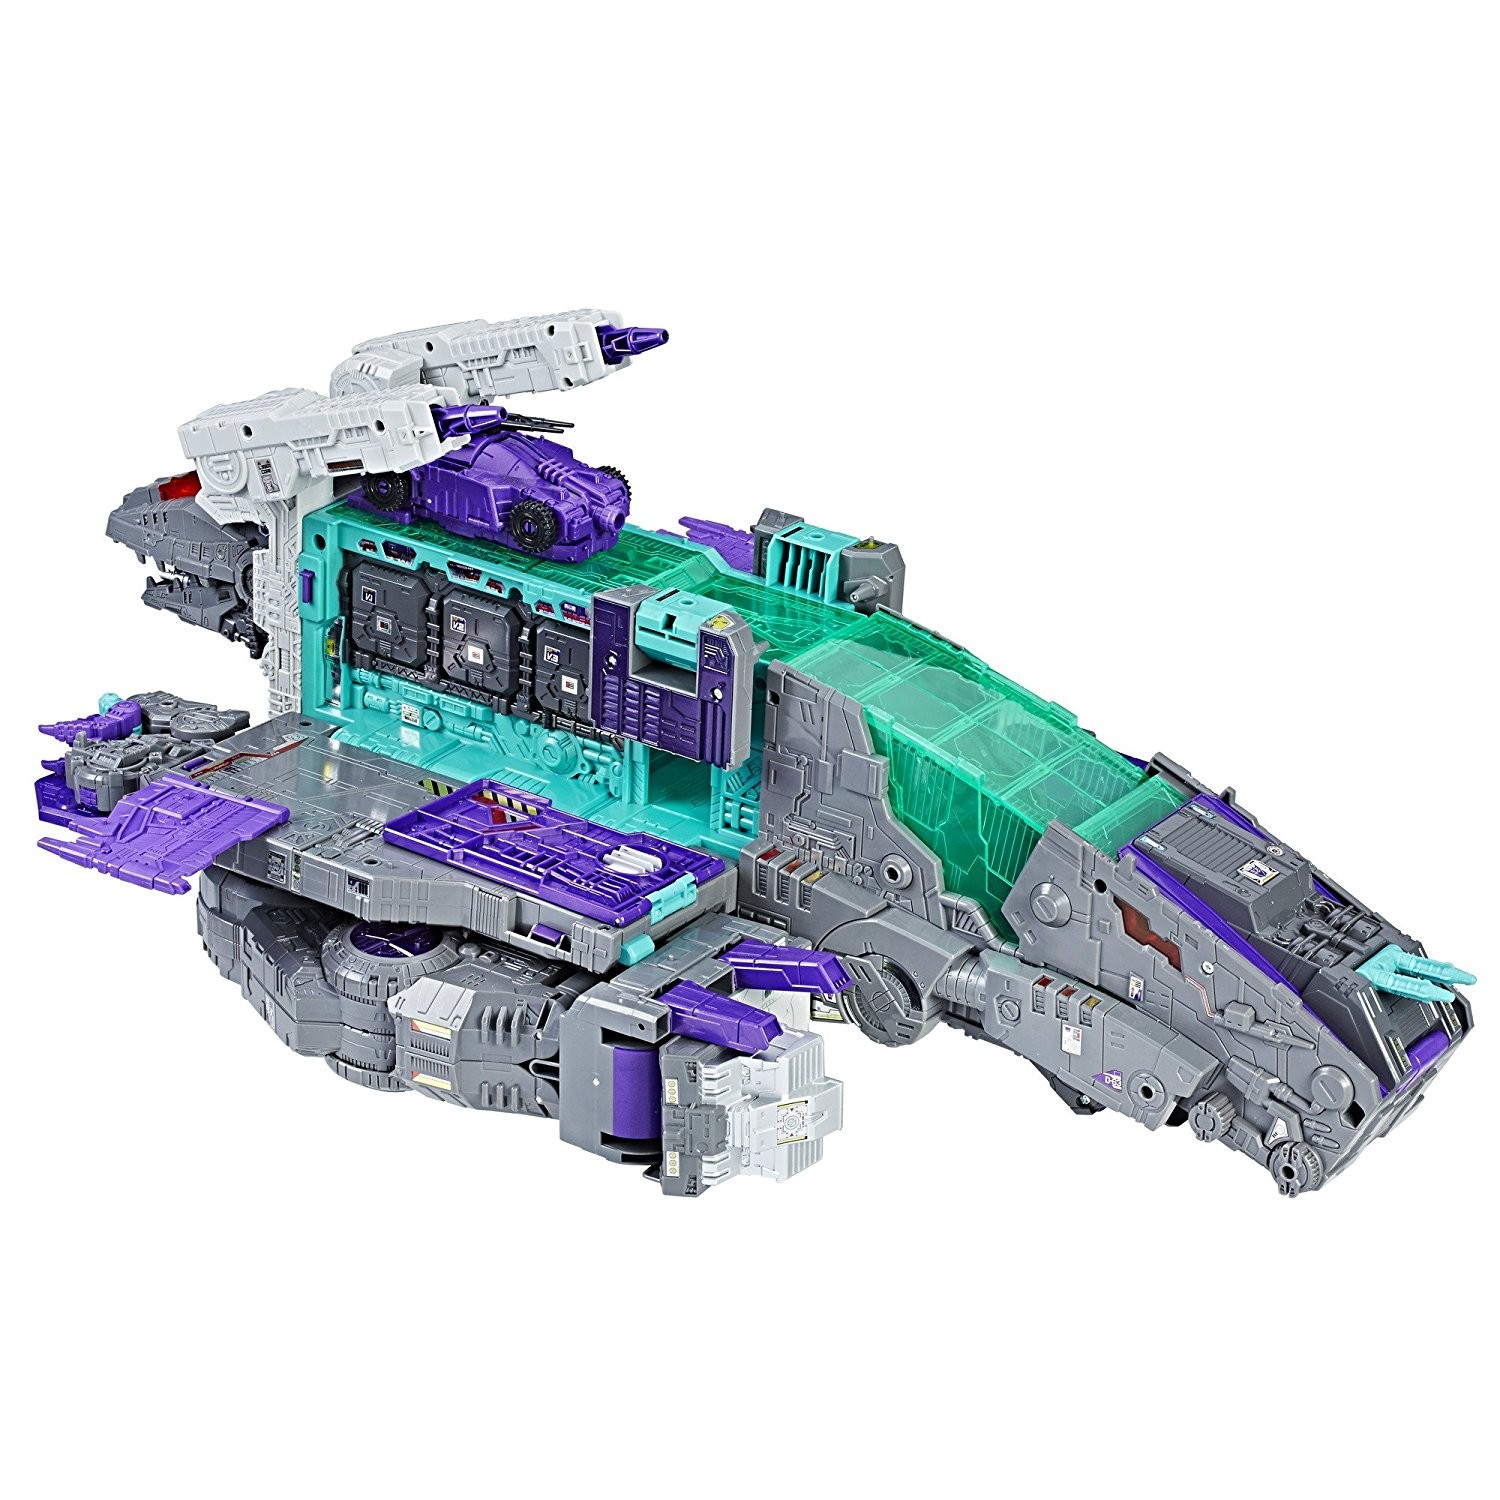 Transformers News: Want Titans Return Trypticon? This is how you can buy him right now!